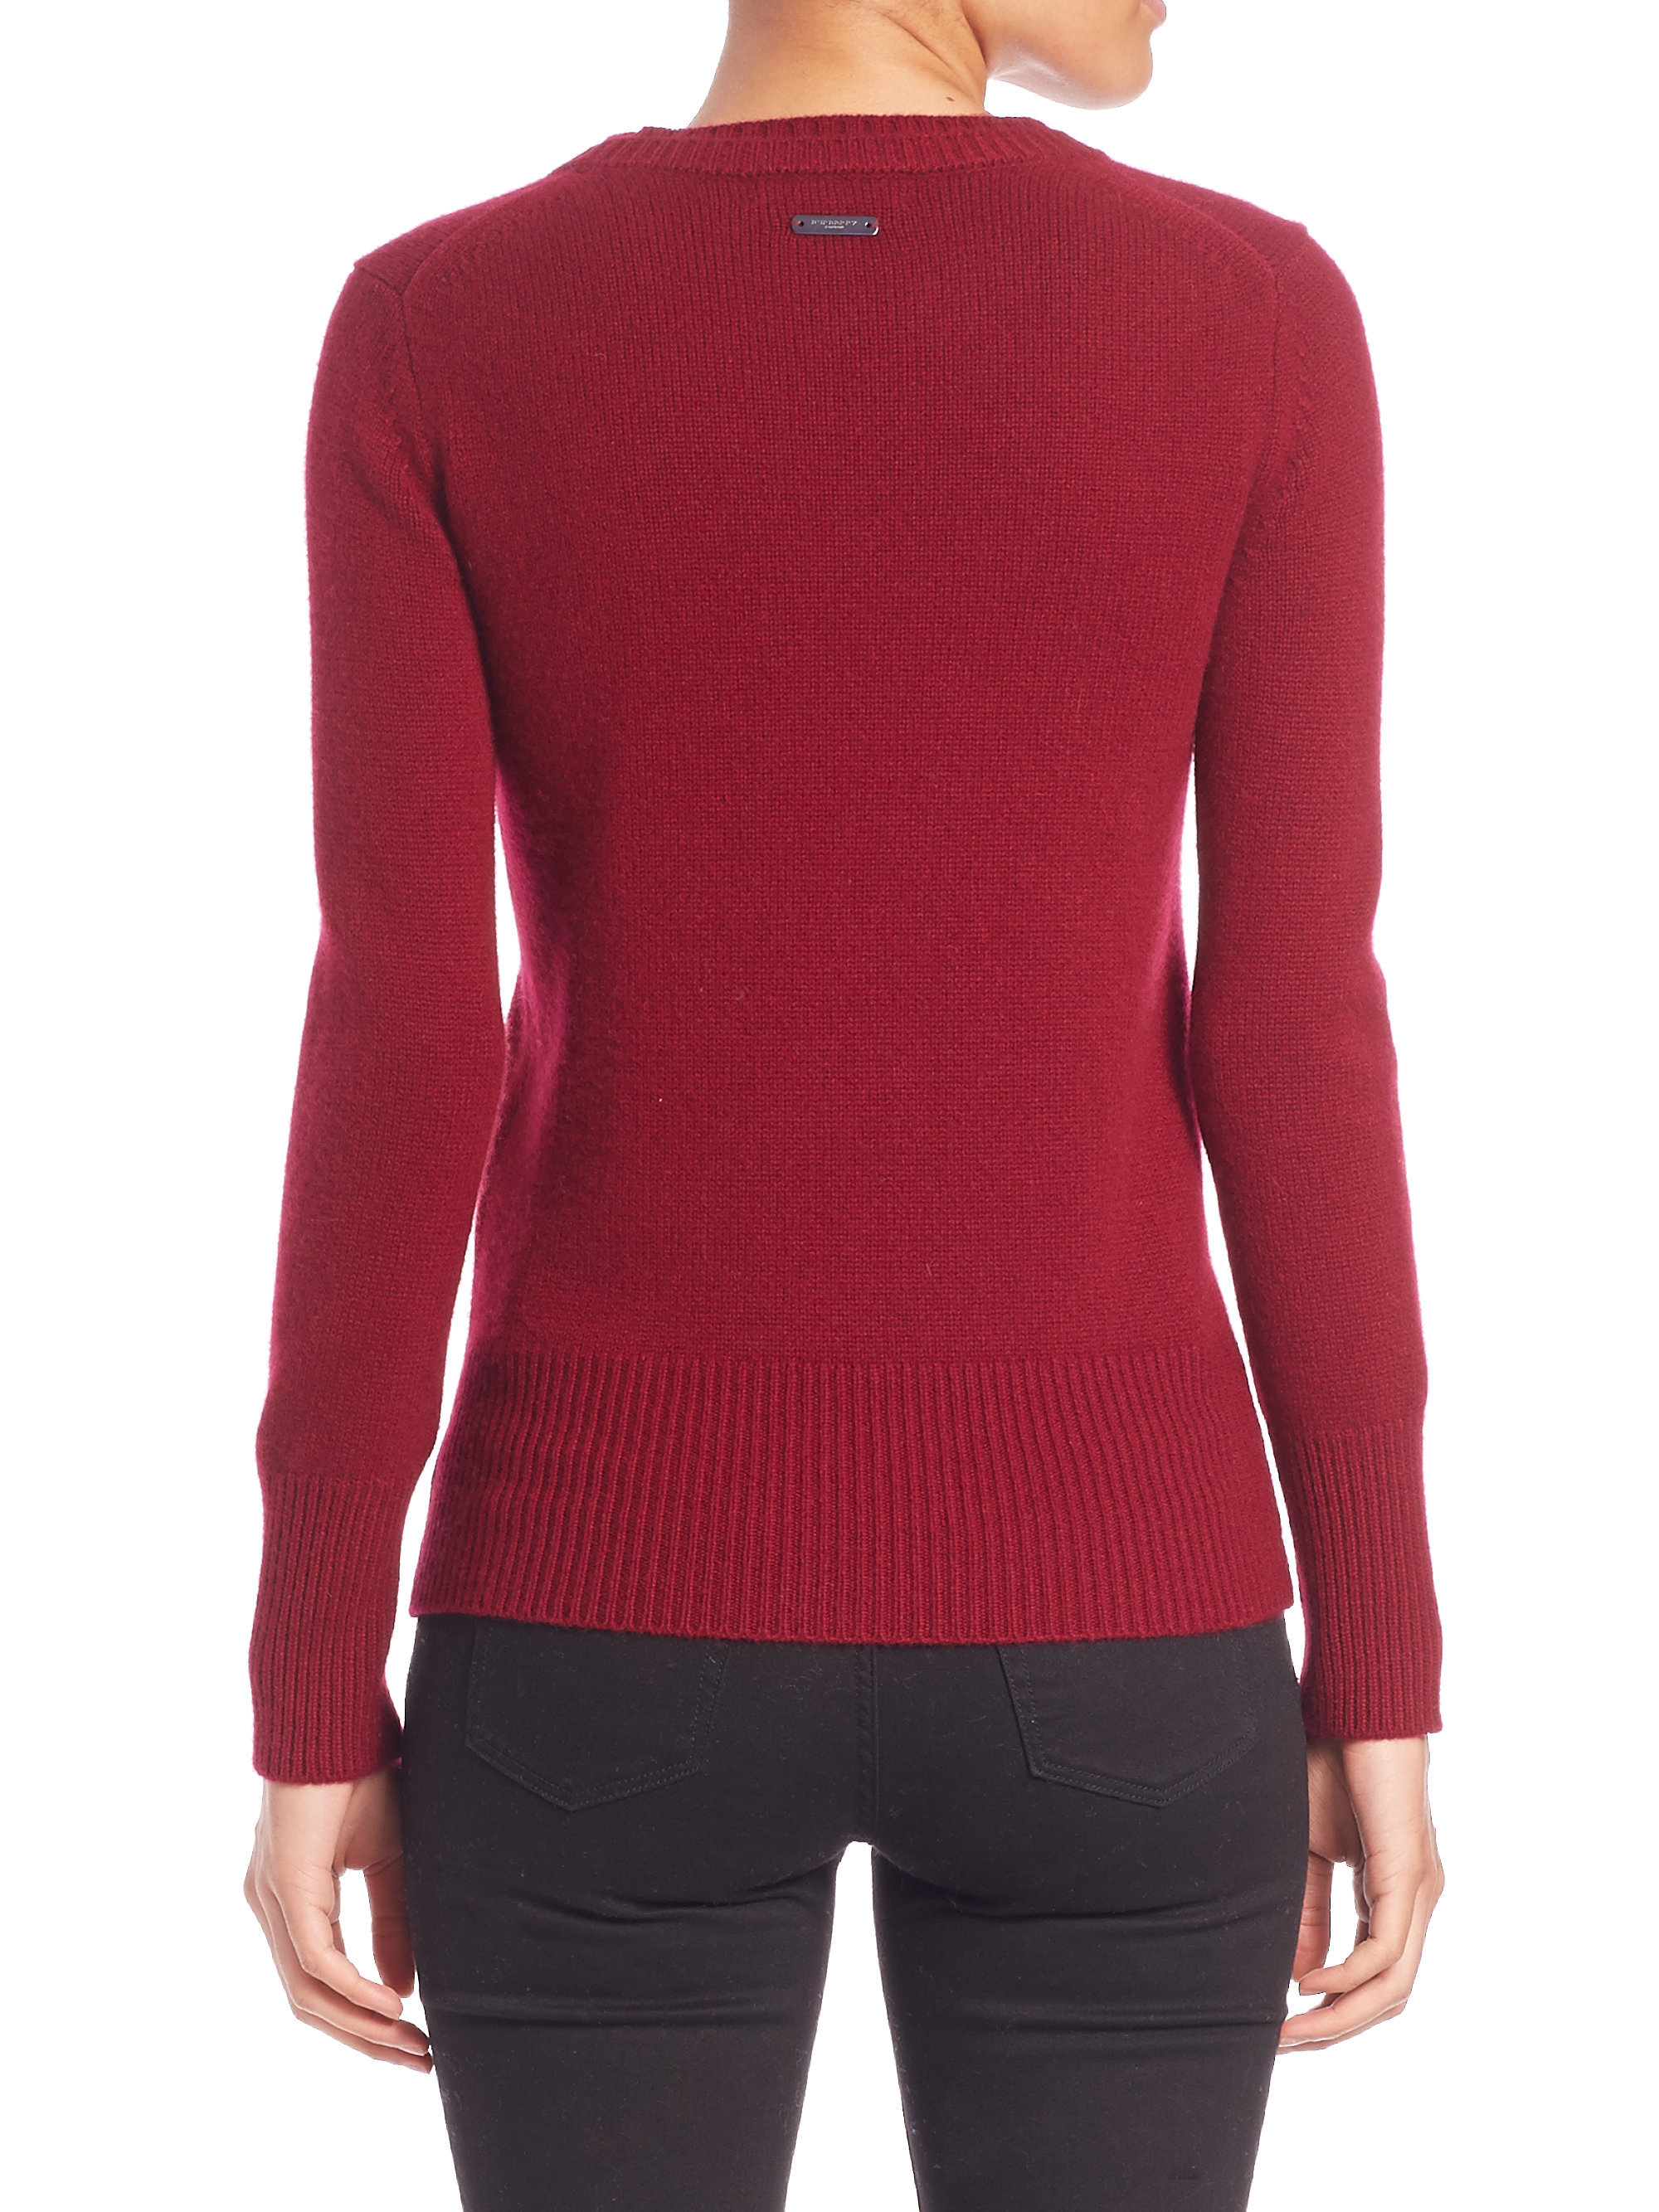 Burberry Cherry Pink Cashmere Knit Sweater in Red - Lyst